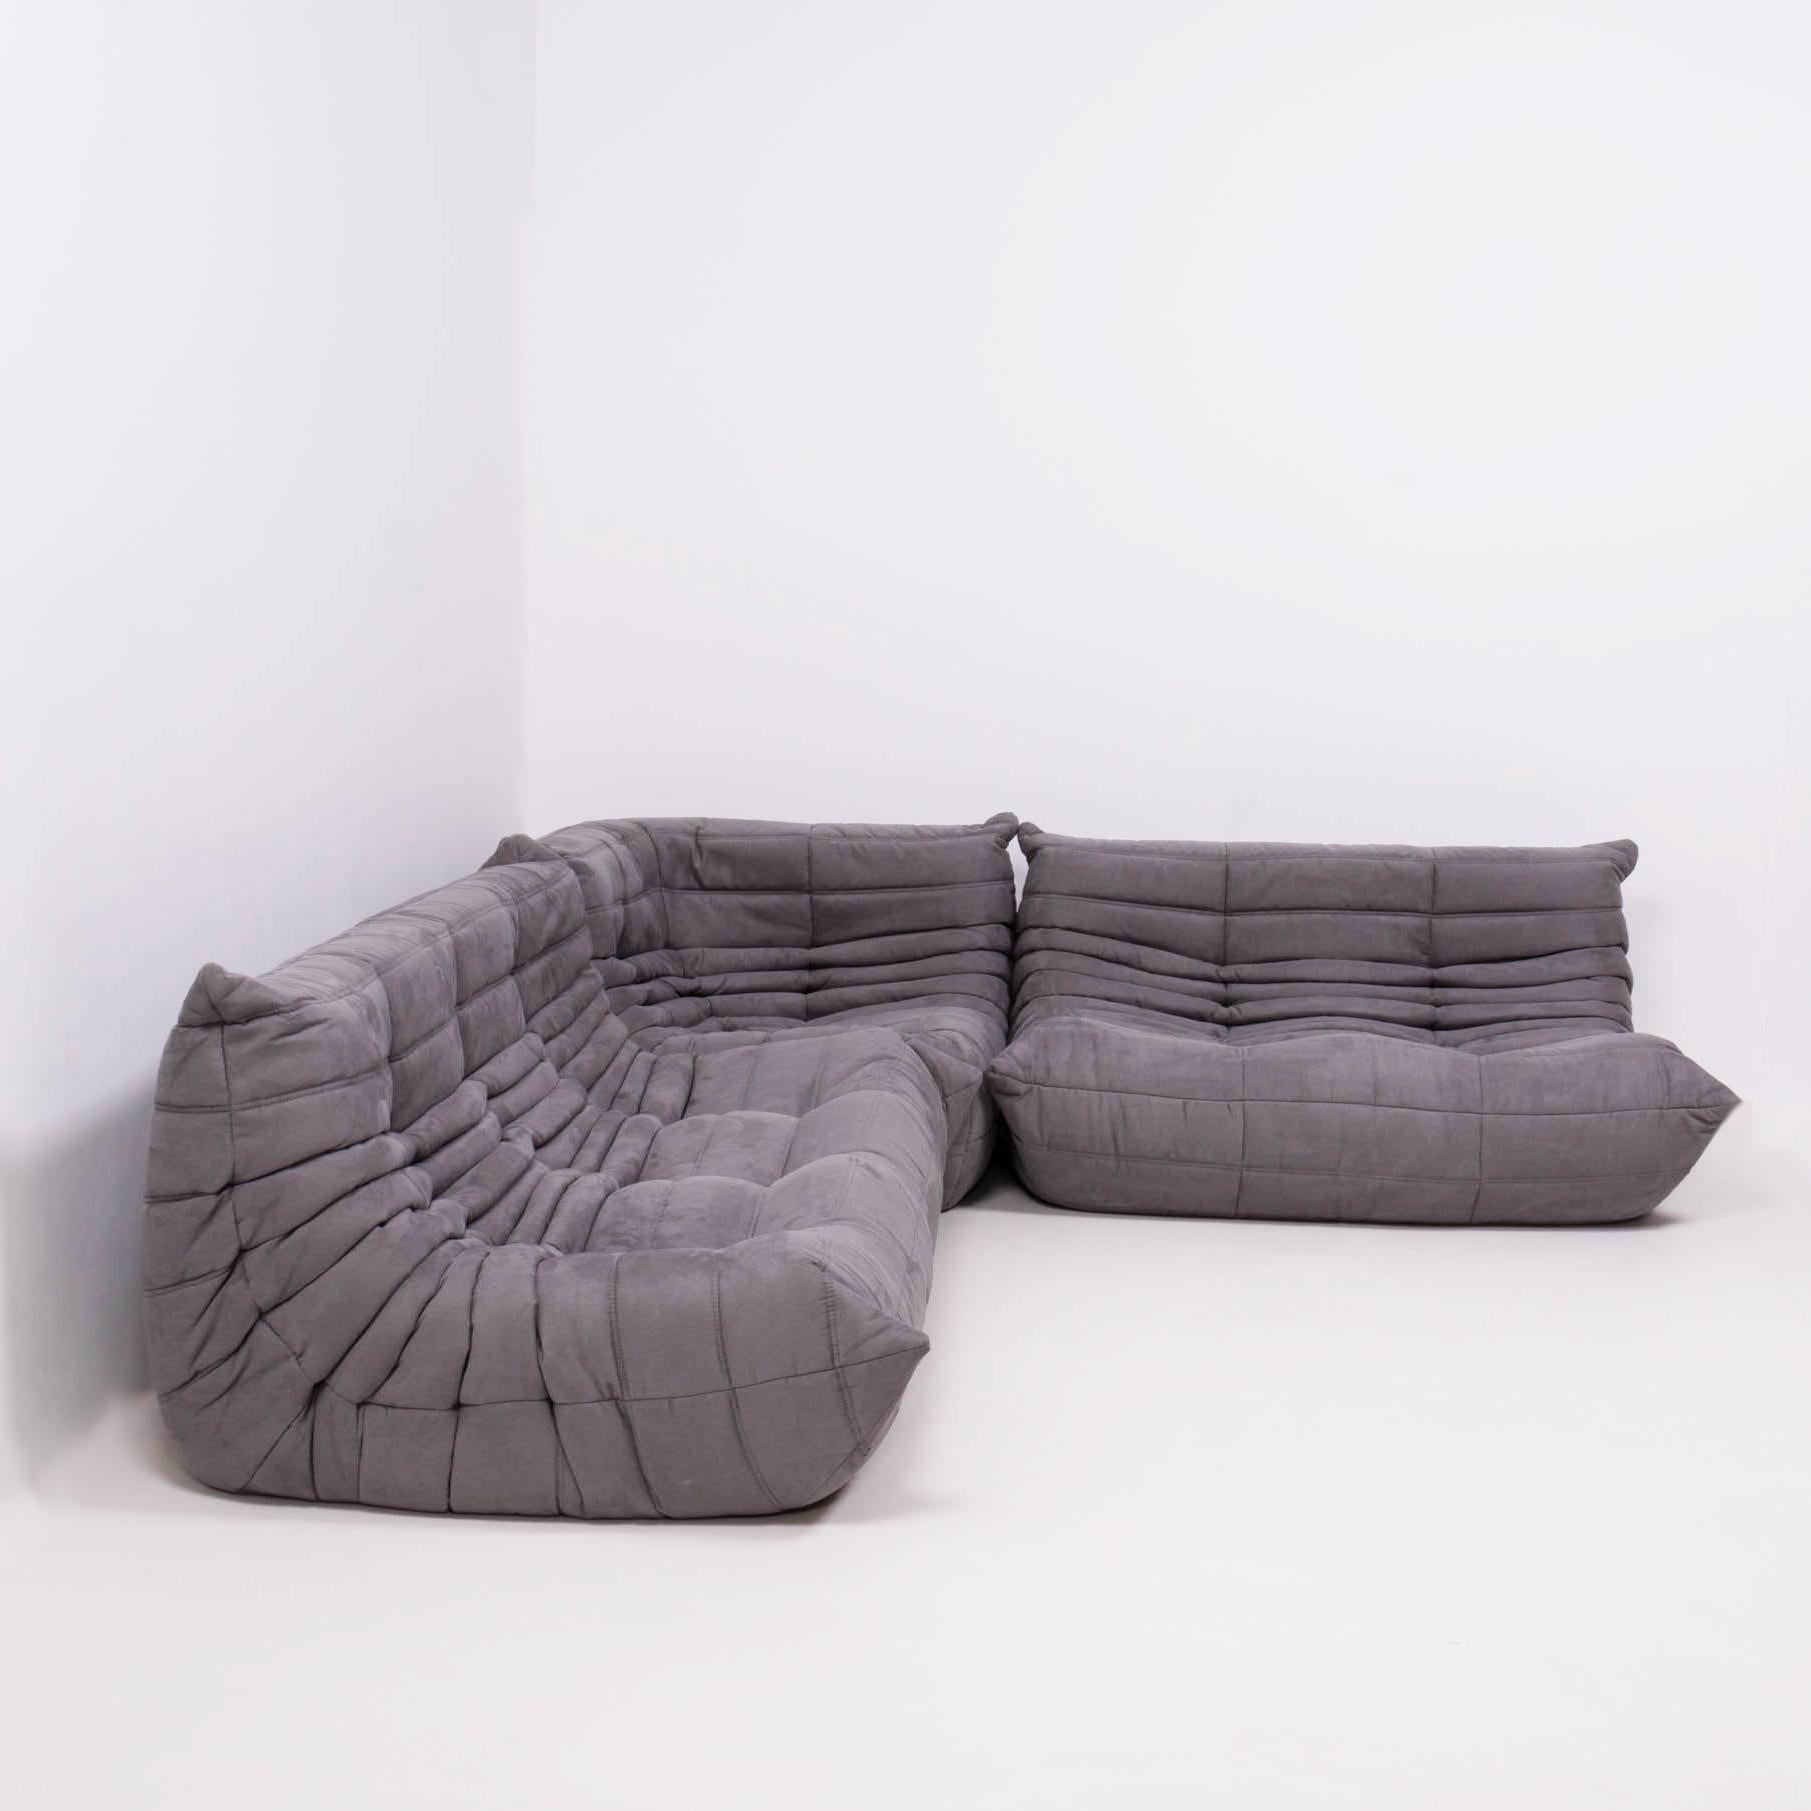 The iconic Togo sofa, originally designed by Michel Ducaroy for Ligne Roset in 1973, has become a design Classic.

This three-piece modular set is incredibly versatile and can be configured into one large corner sofa or split for a multitude of